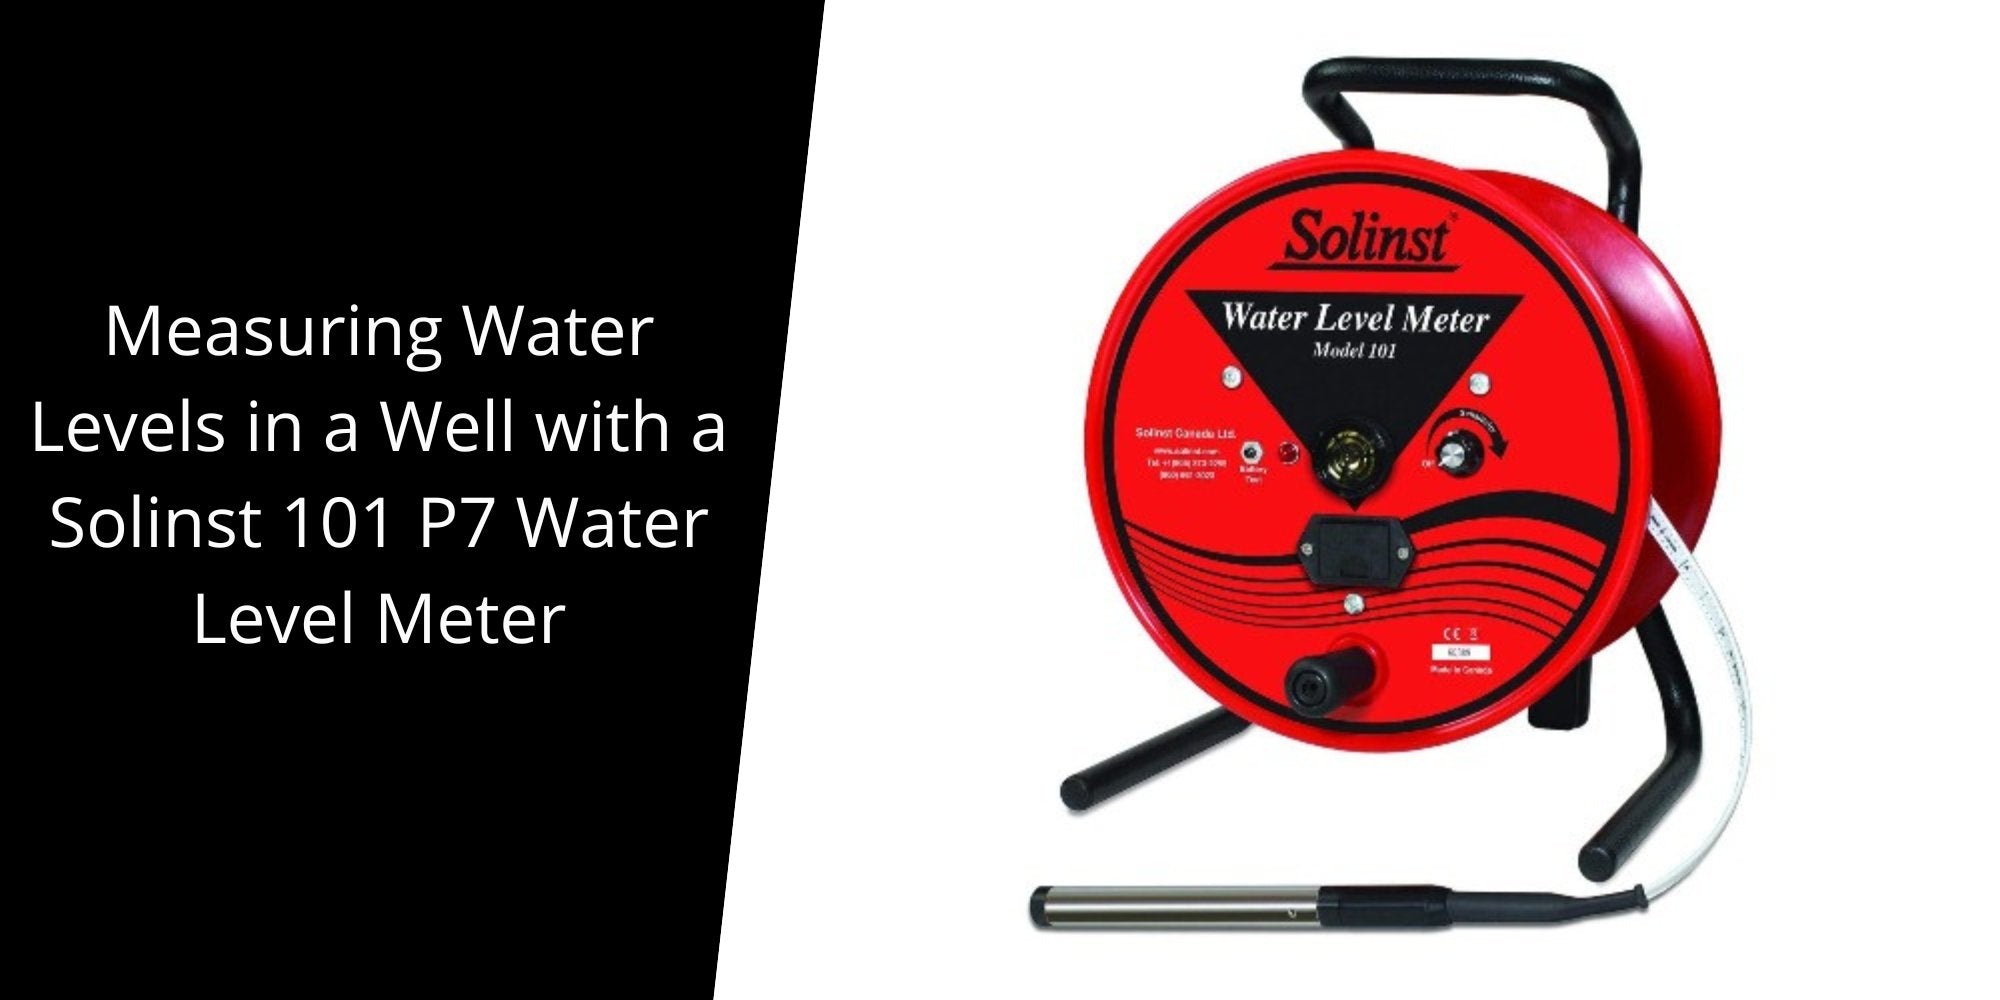 https://carbonbulksales.com/cdn/shop/articles/measuring-water-levels-in-a-well-with-a-solinst-101-p7-water-level-meter-a-step-by-step-guide-684105.jpg?v=1694537785&width=2000